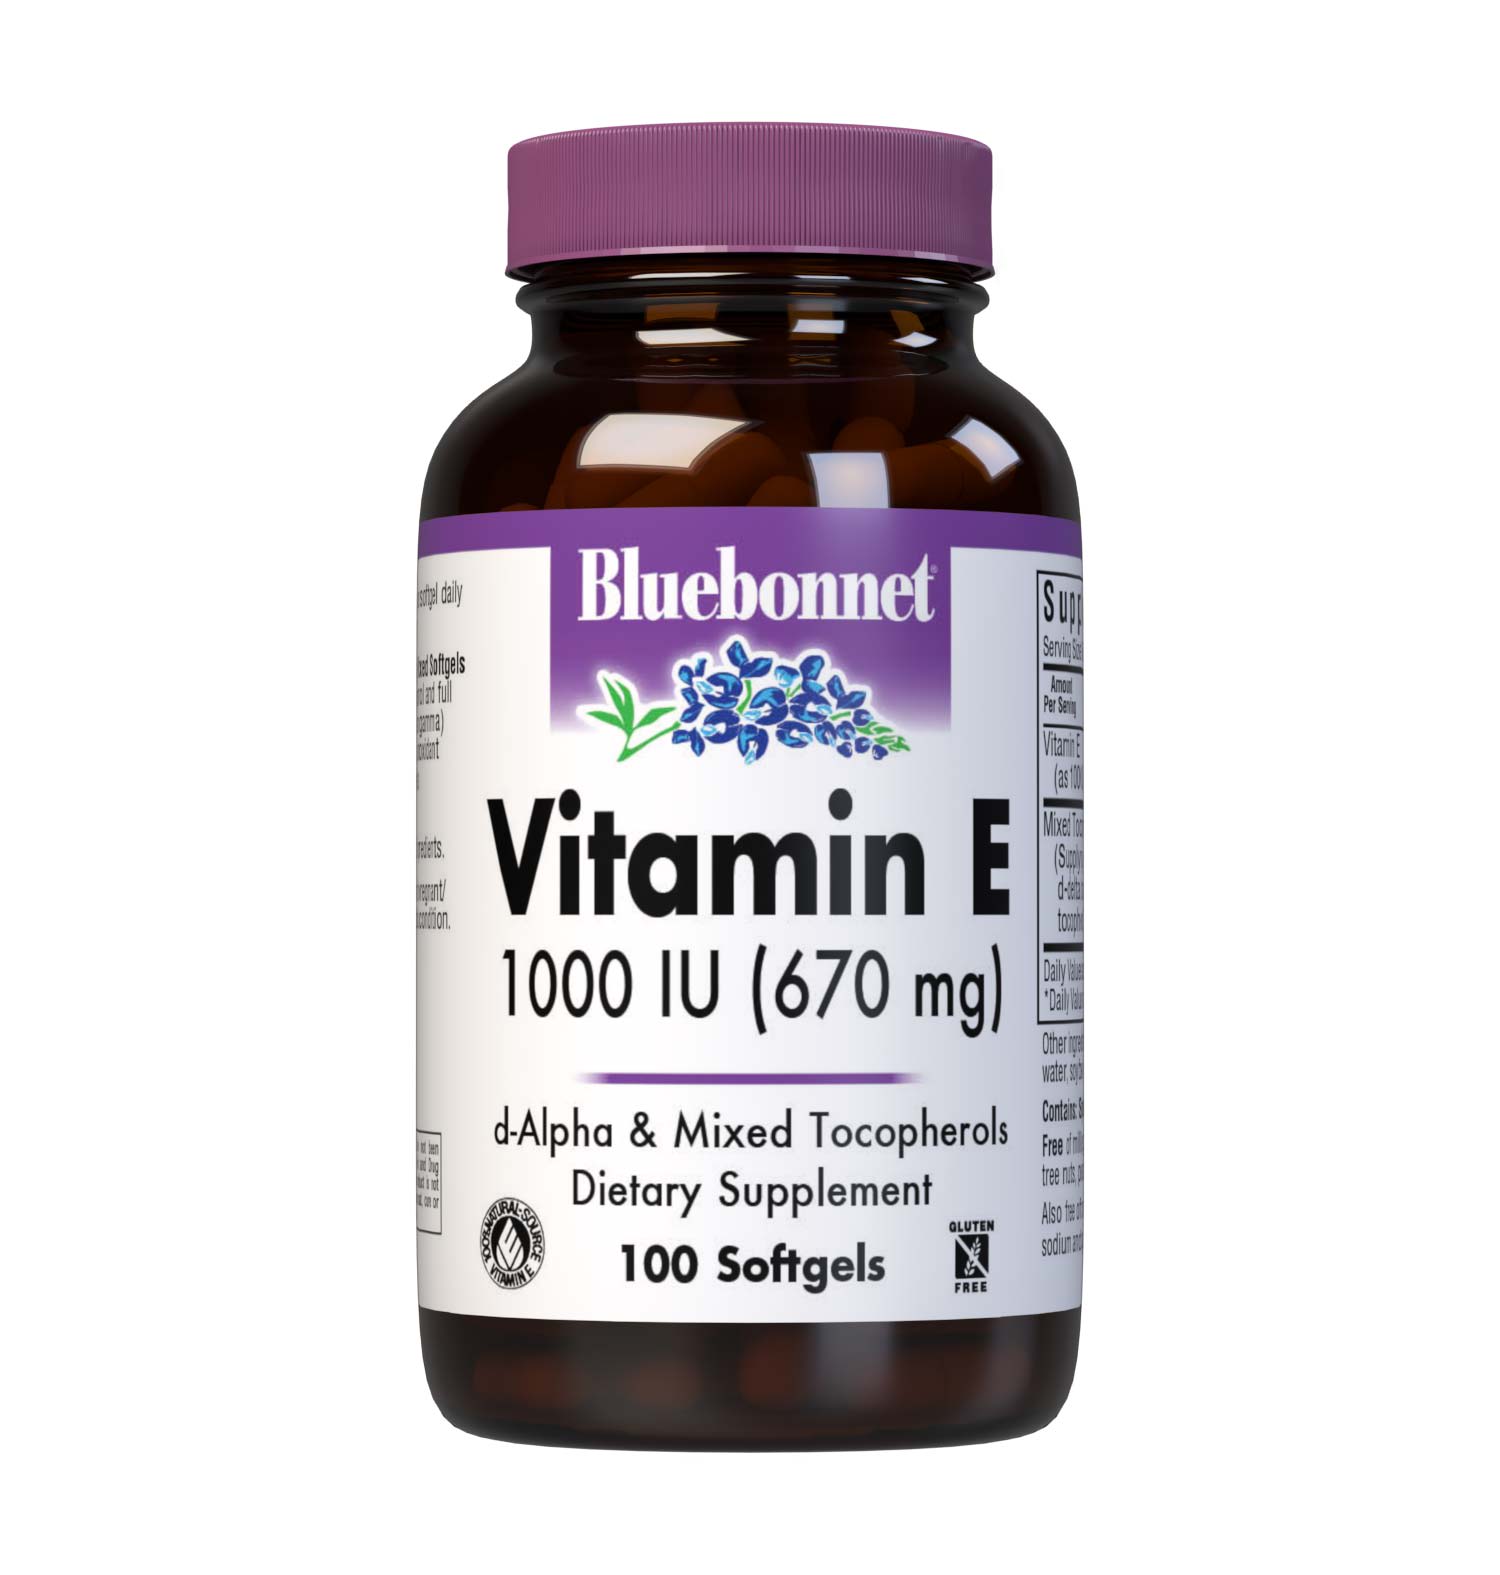 Bluebonnet’s Vitamin E 1000 lU (670 mg) Mixed Softgels are specially formulated with d-alpha tocopherol and full spectrum tocopherol isomers (beta, delta and gamma) in a base of vegetable oil. Vitamin E is an antioxidant that provides free radical protection as well as cardiovascular support. #size_100 count